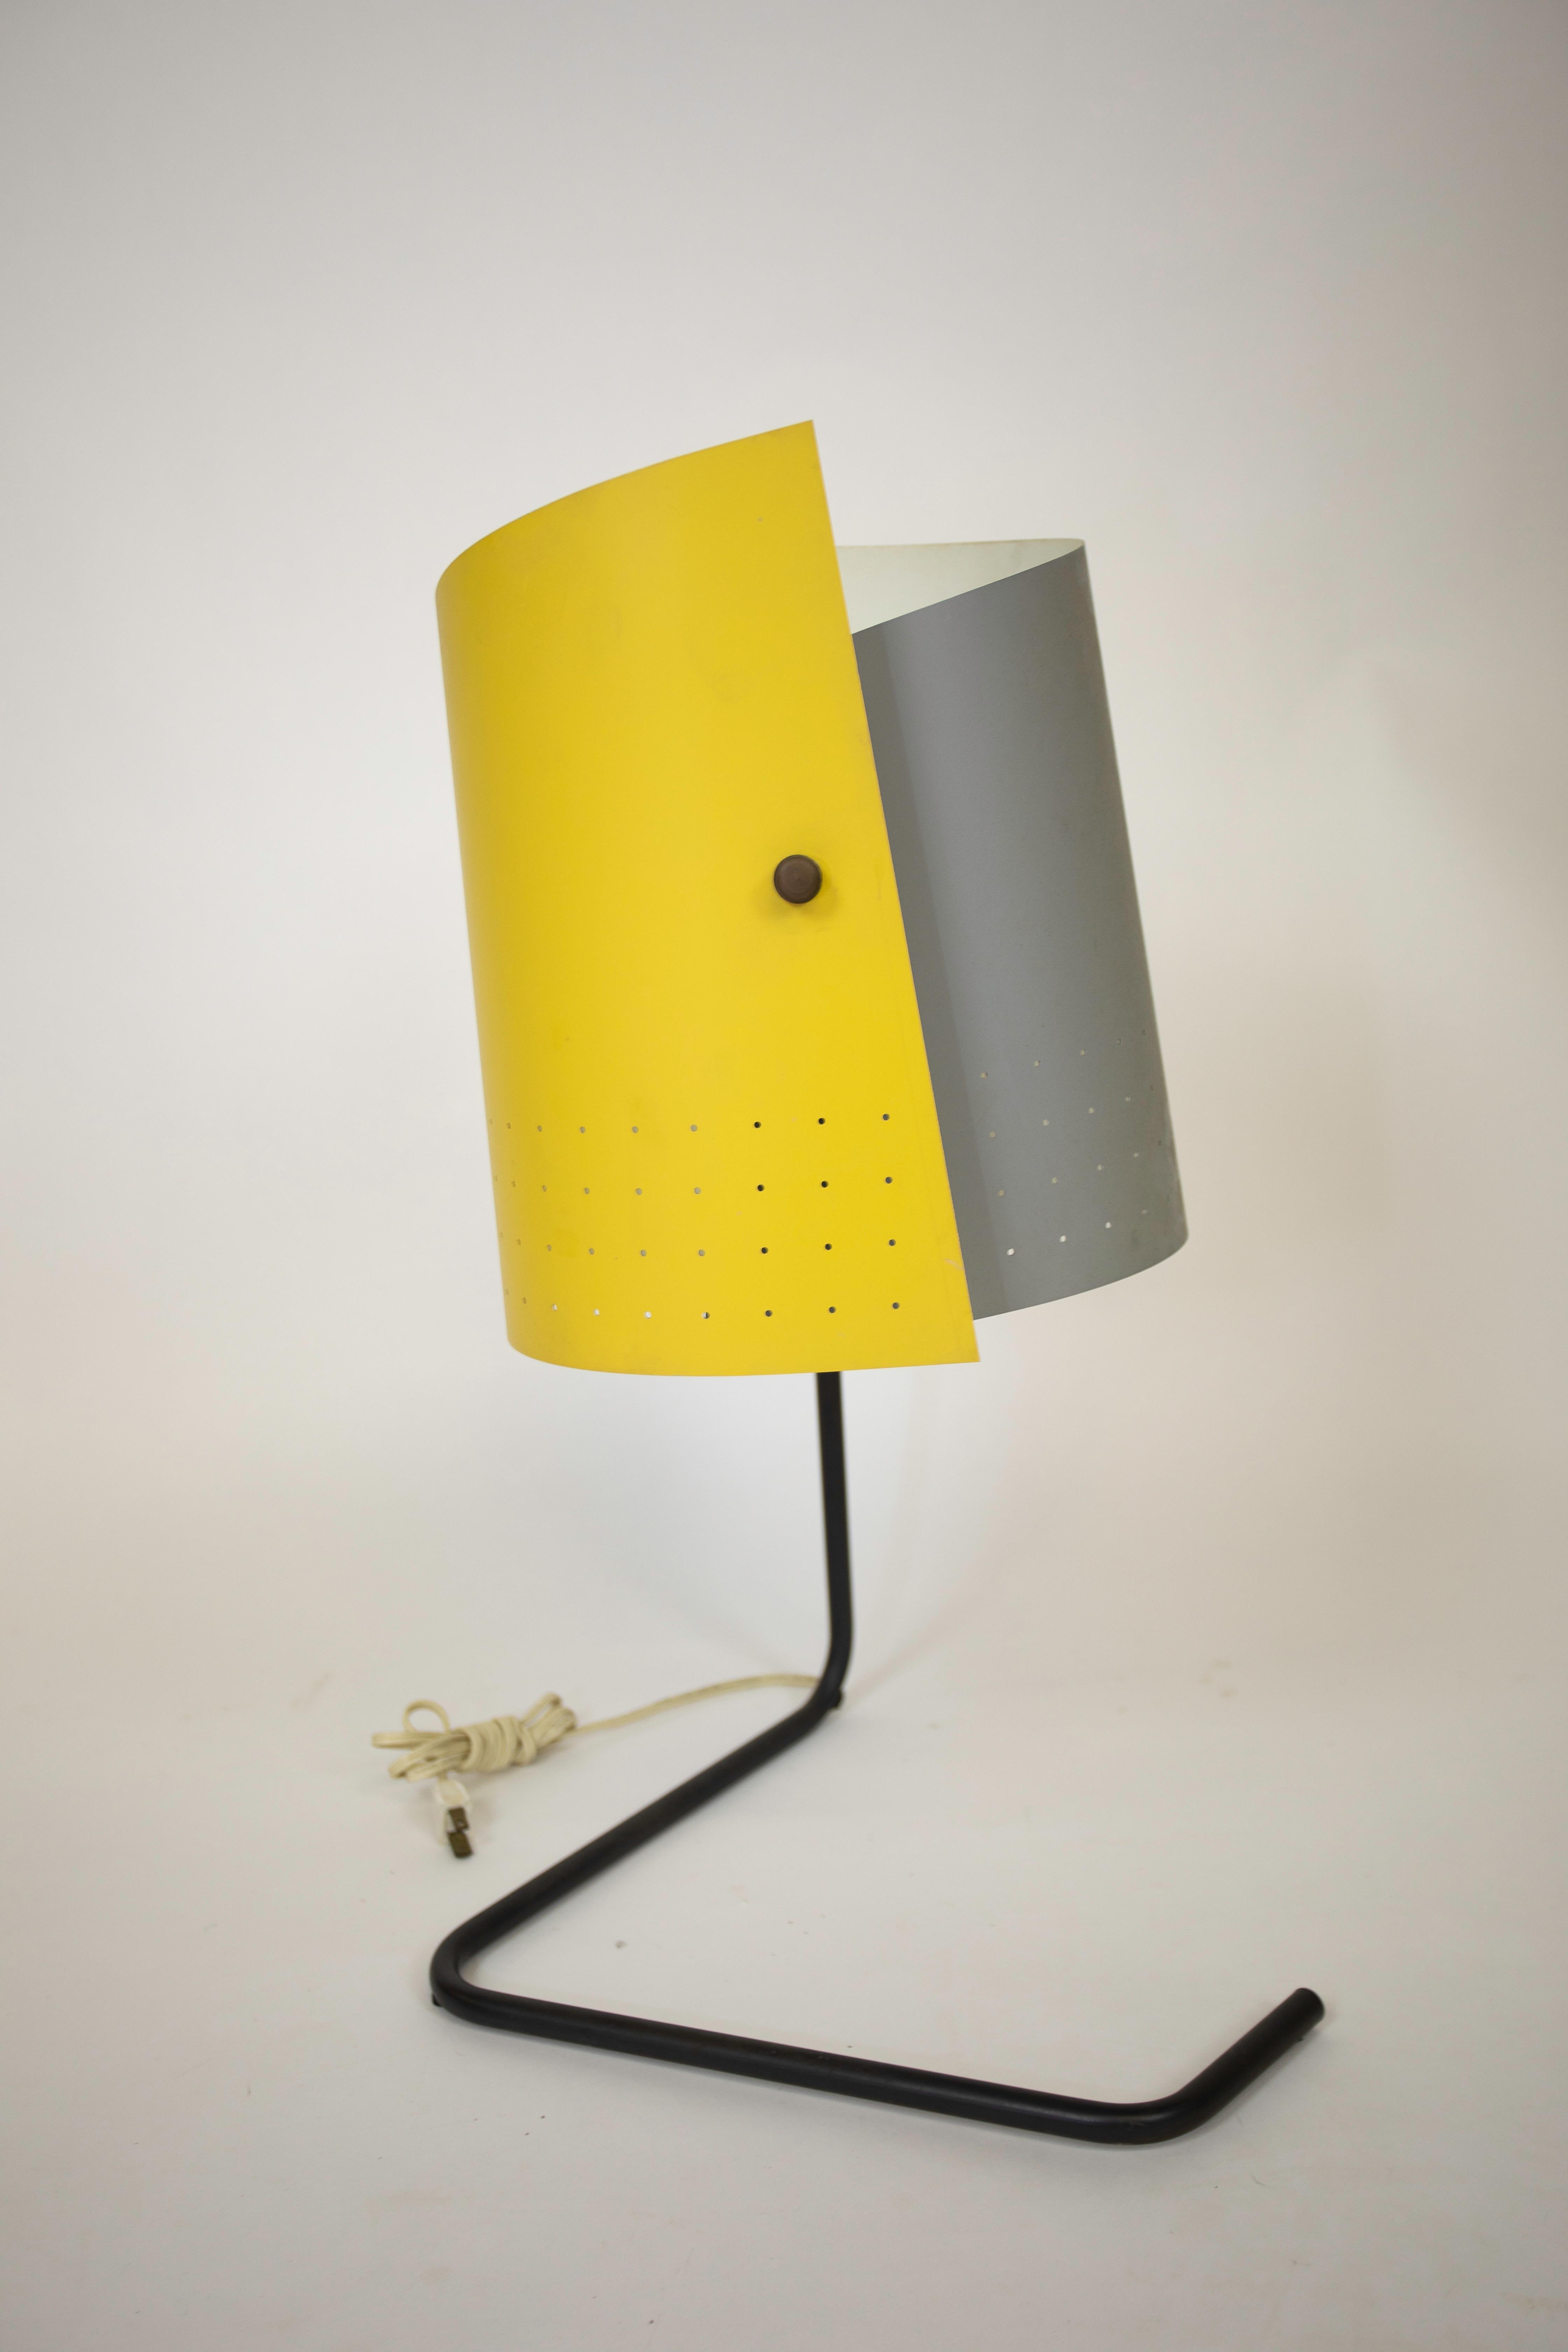 Manufactured by Heifetz Manufacturing in 1951.
This lamp was 1 of 10 lamps Chosen for the Museum of Modern Art's Low cost lighting competition in 1951.
Awarded honorable mention.
Original paint and surface.